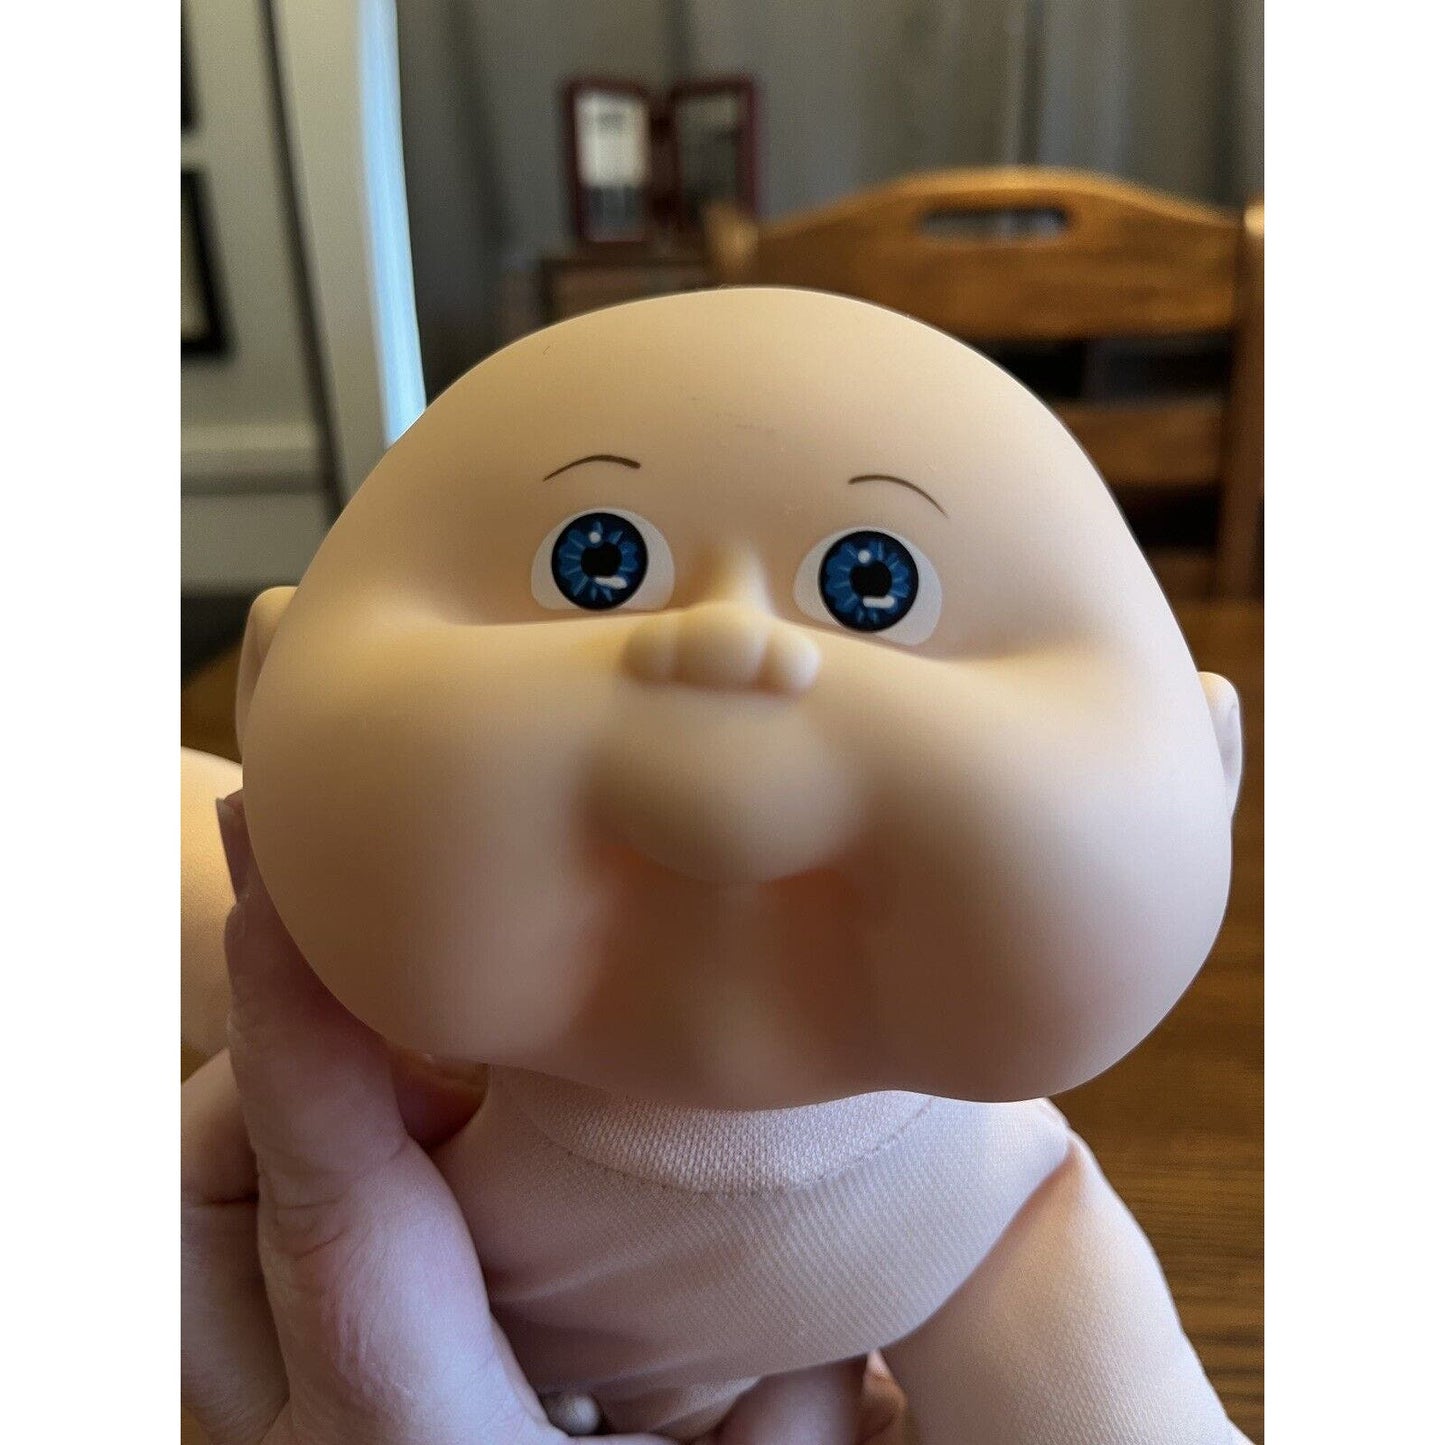 1980s Cabbage Patch Kid Bean Butt Baby BBB Bald Blue Eyes Teddy Bear Car Outfit